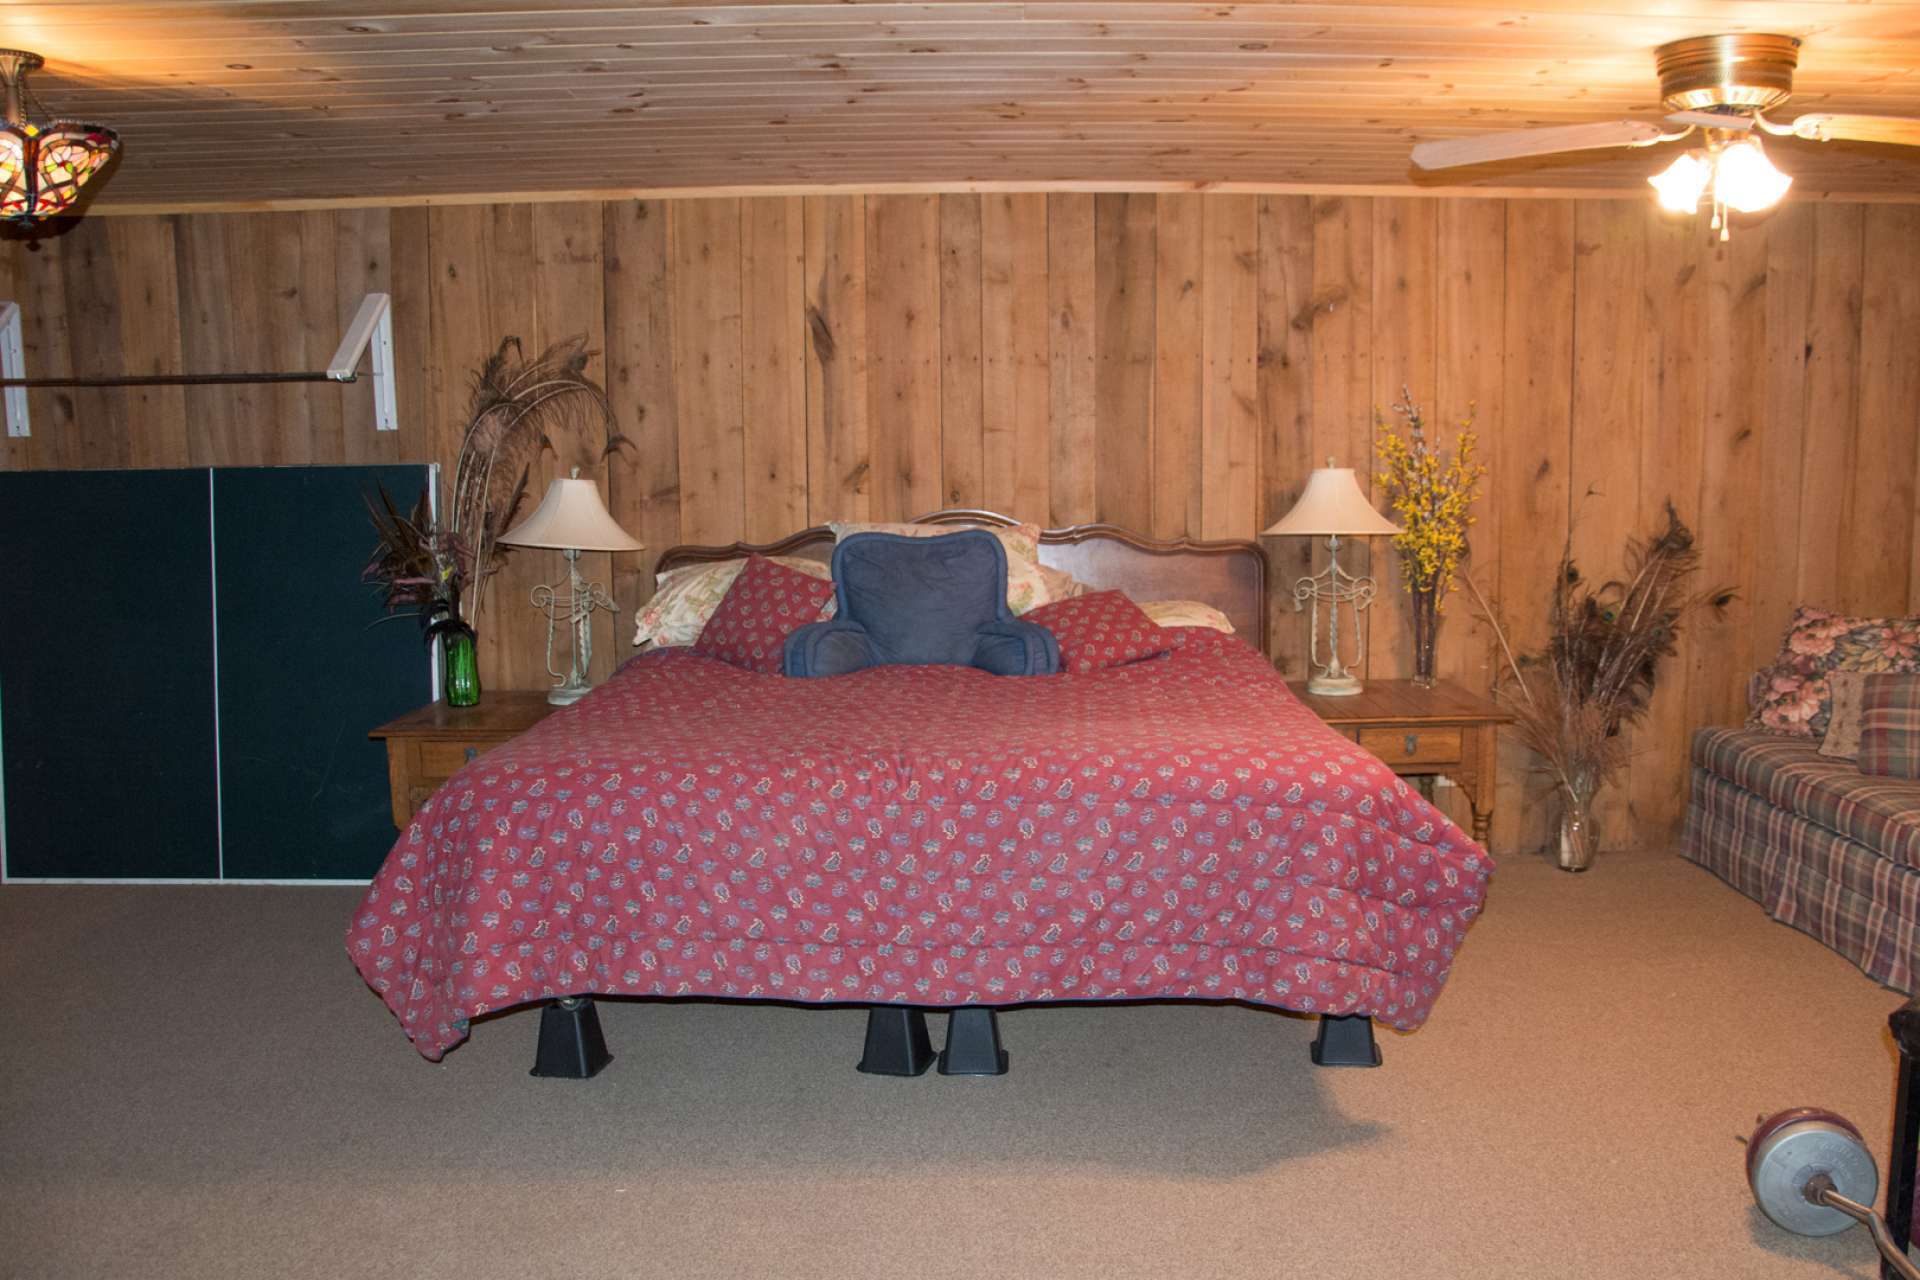 Your guests will enjoy their privacy  here in the overhead living  area of the barn.